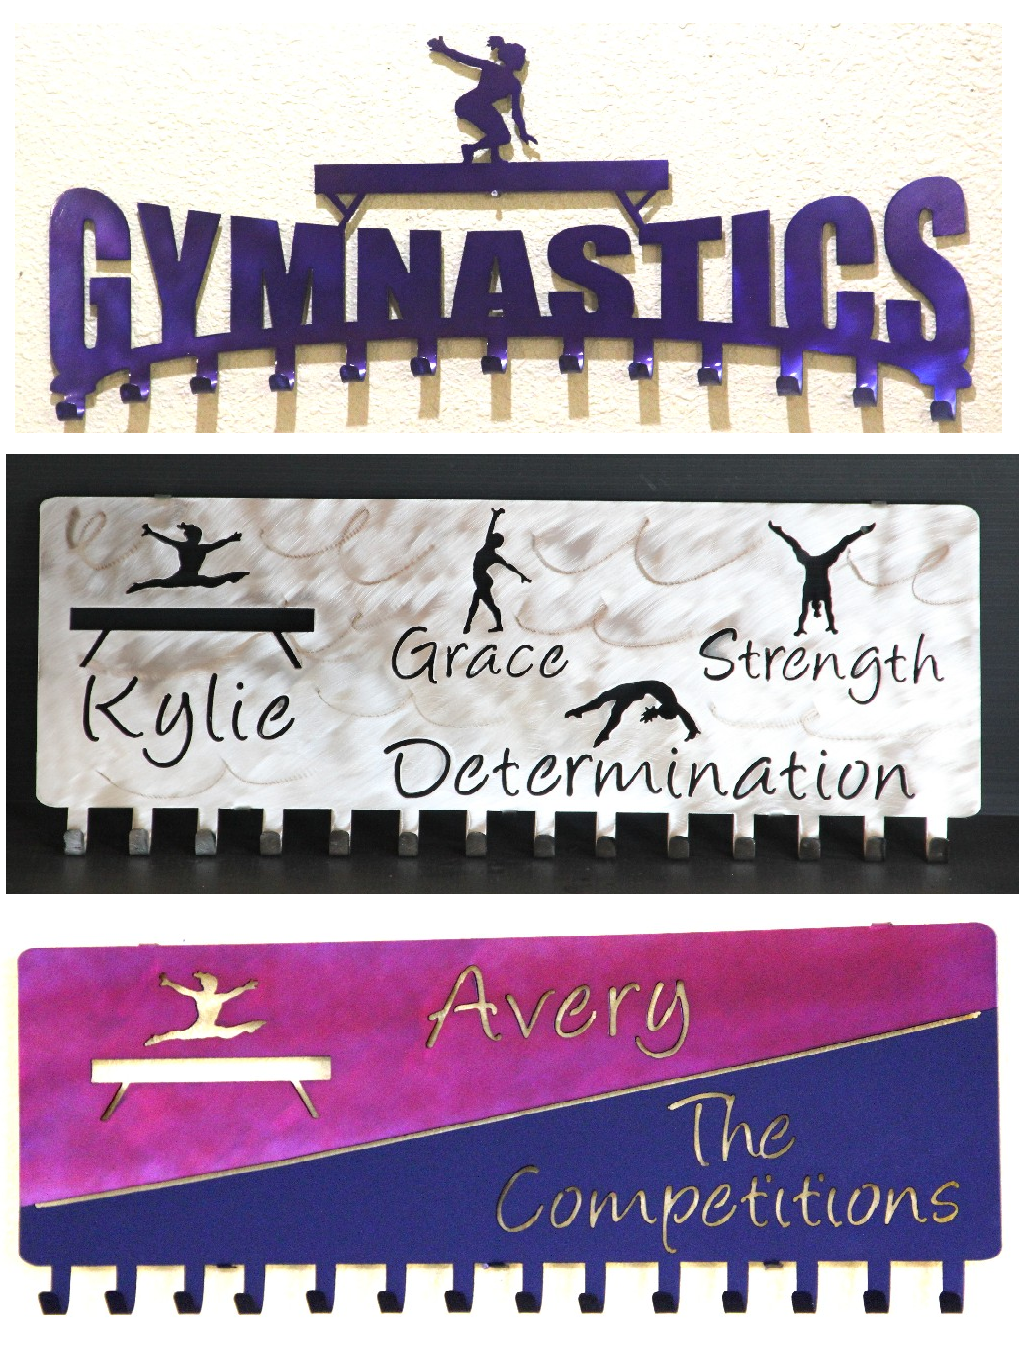 Gymnastics Medal Holder: Personalized Medals Hangers: Gymnastics Medal and Ribbons Display